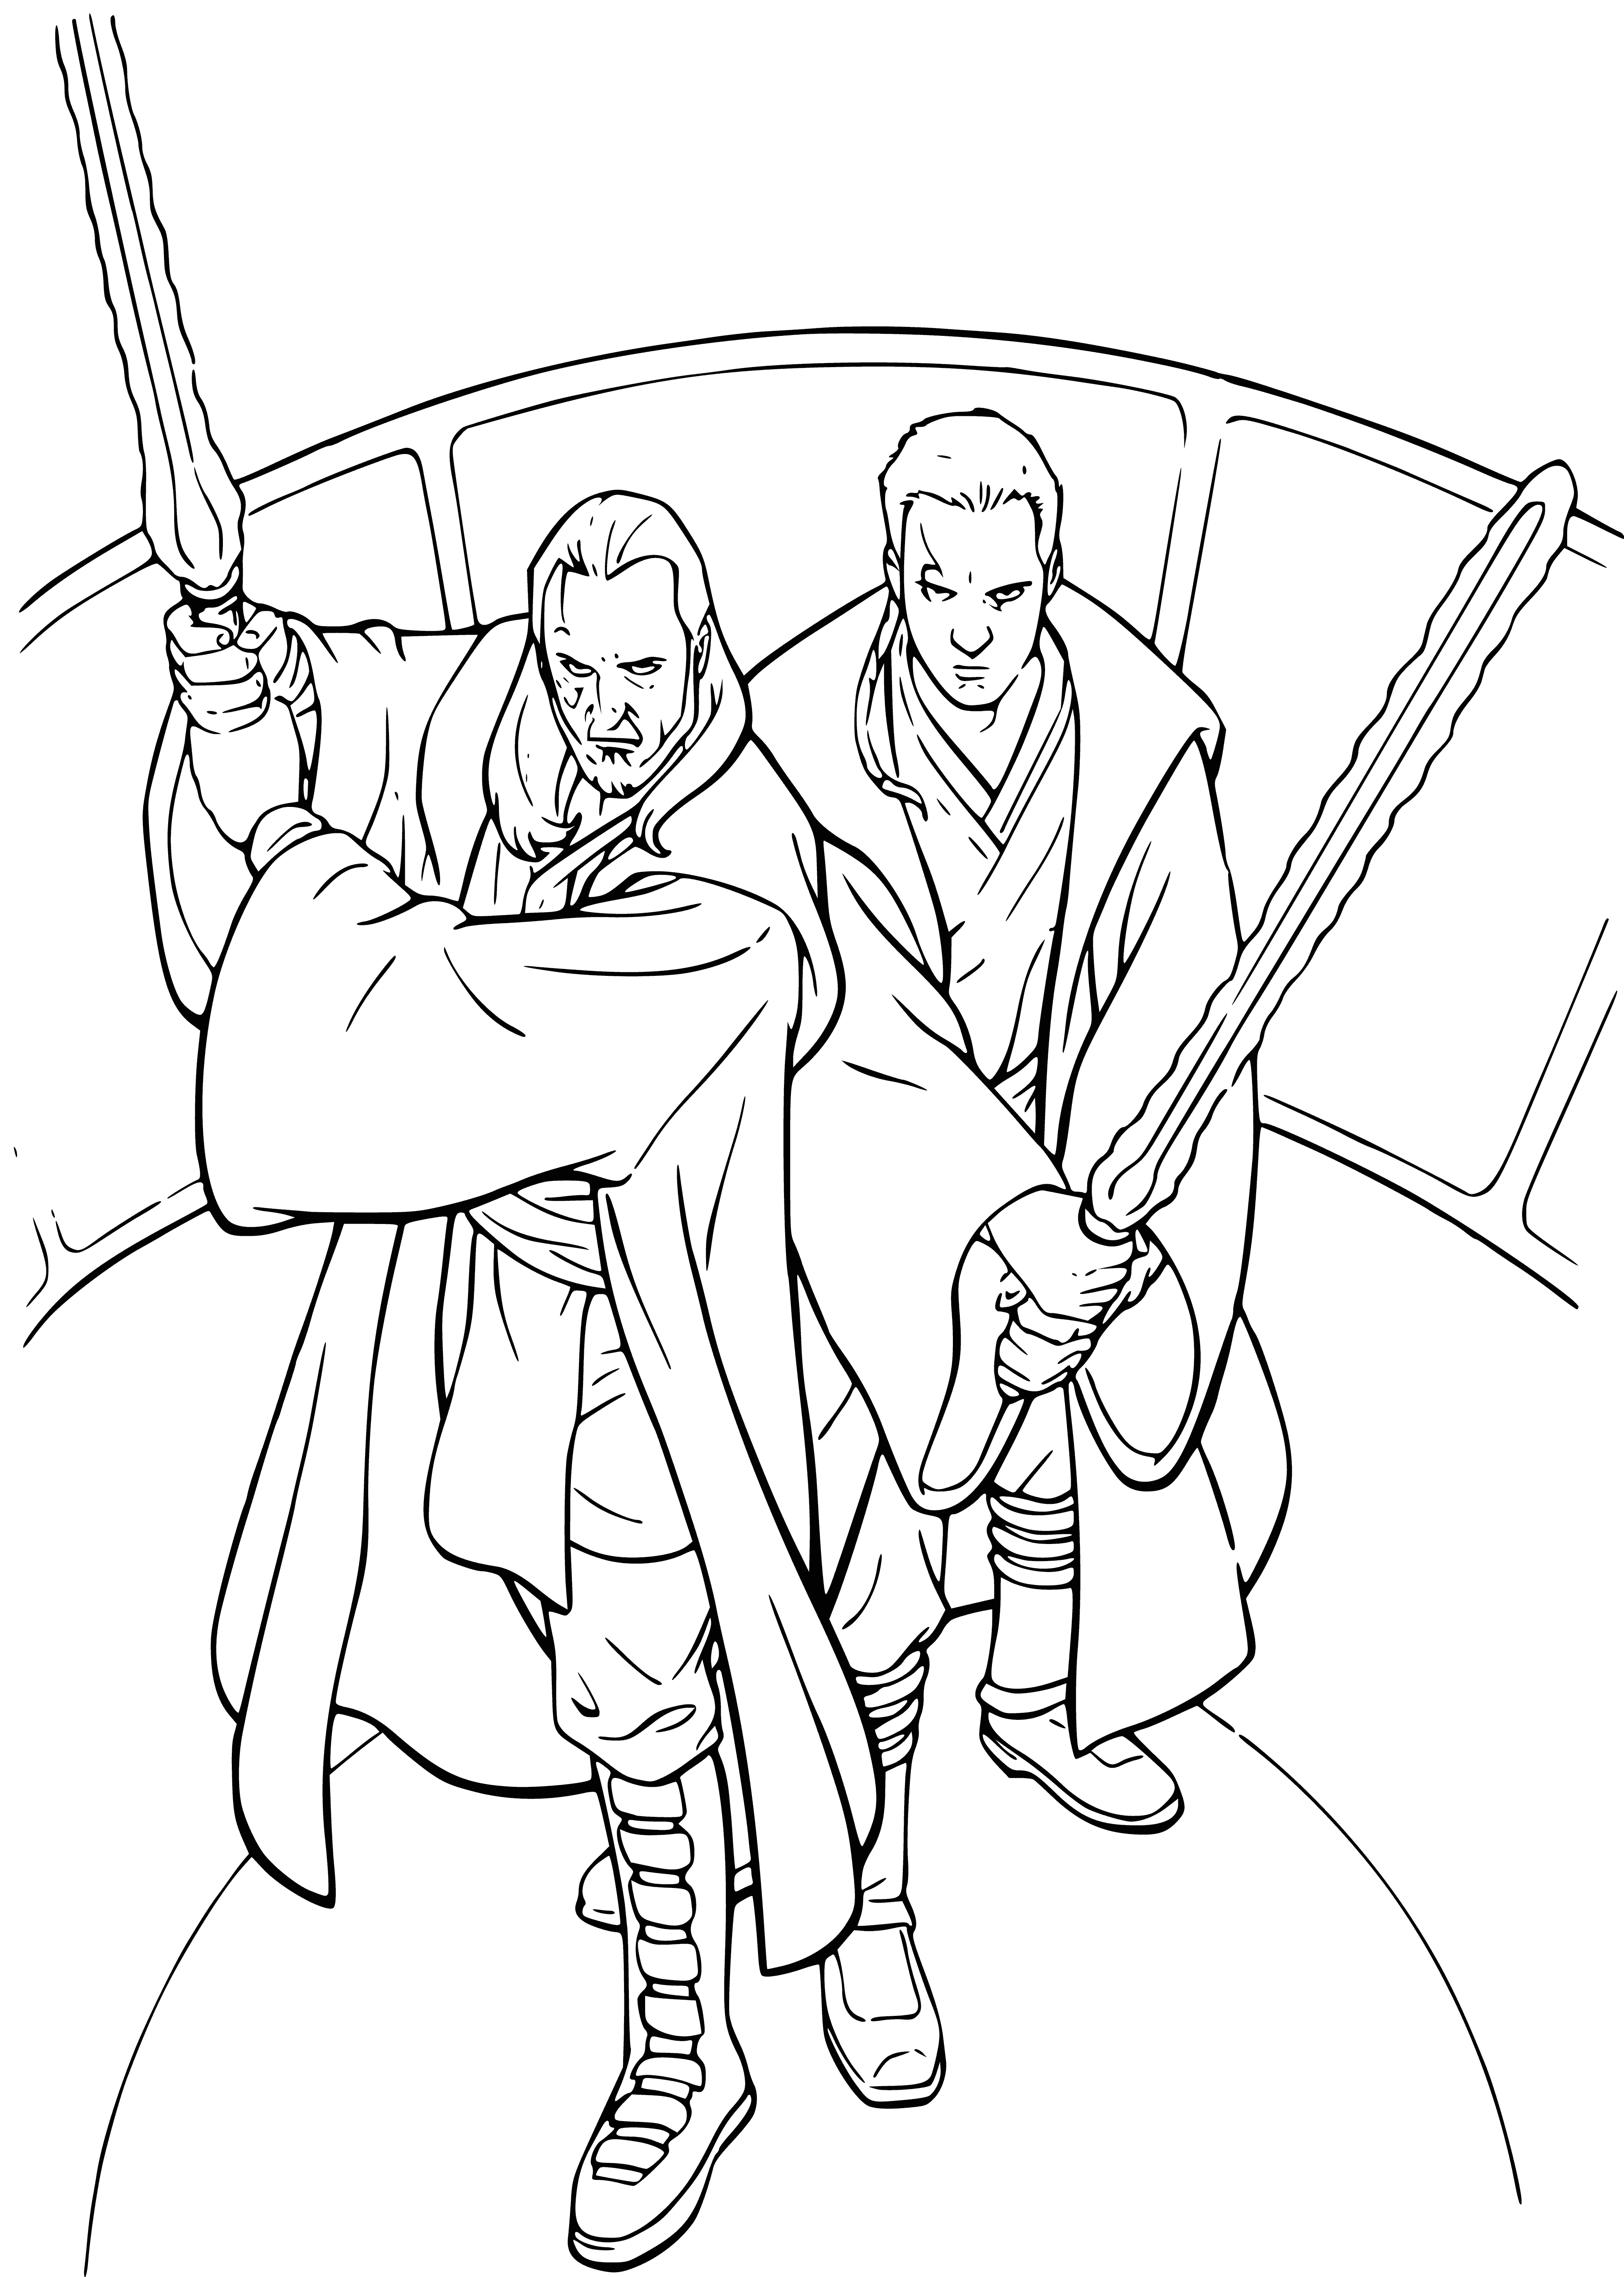 coloring page: "Star Wars: Episode I - The Phantom Menace", a 1999 film by George Lucas, is the 4th in the saga following a Republic's struggle against the Trade Federation & Darth Sidious.